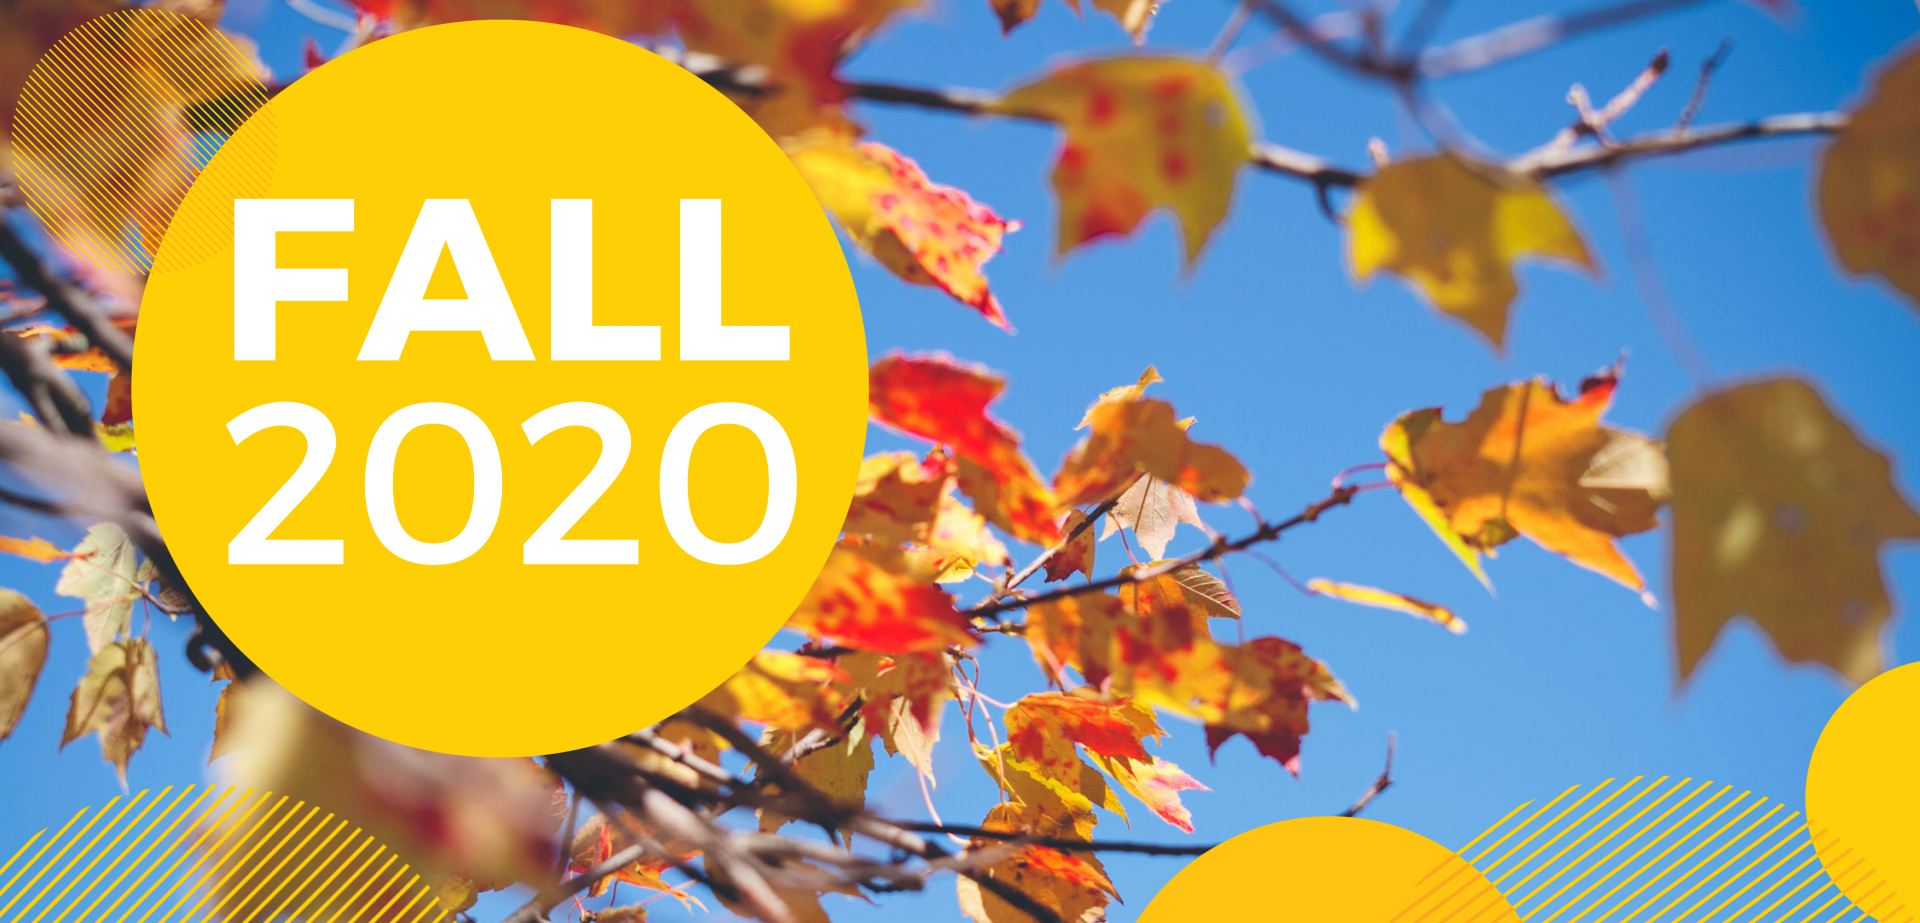 Words: Fall 2020 with a blue sky as the background and fall leaves on a branches. 